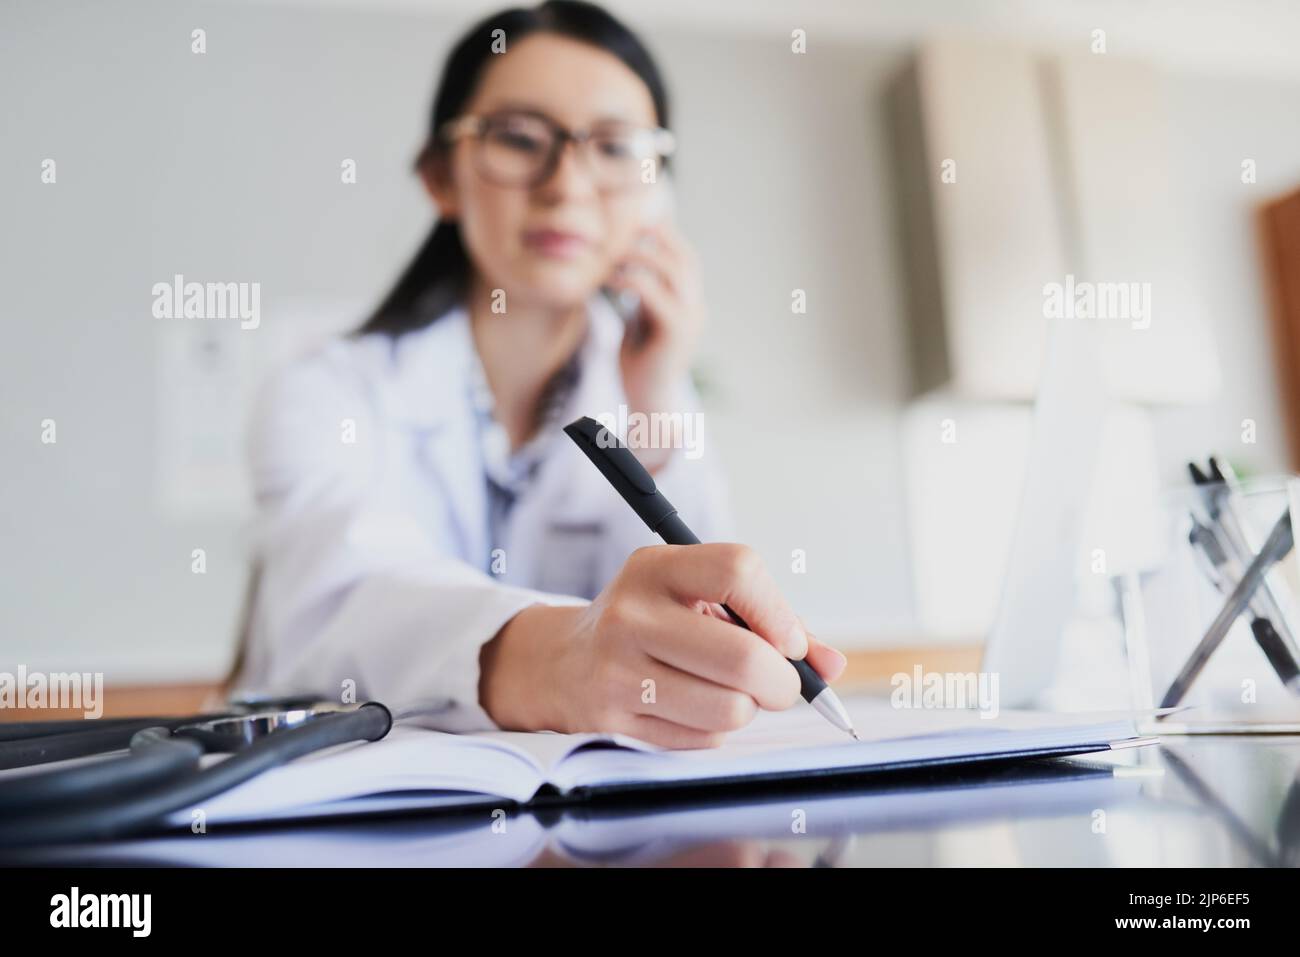 Ive got an open space later today... a young female doctor making notes while working in a hospital. Stock Photo